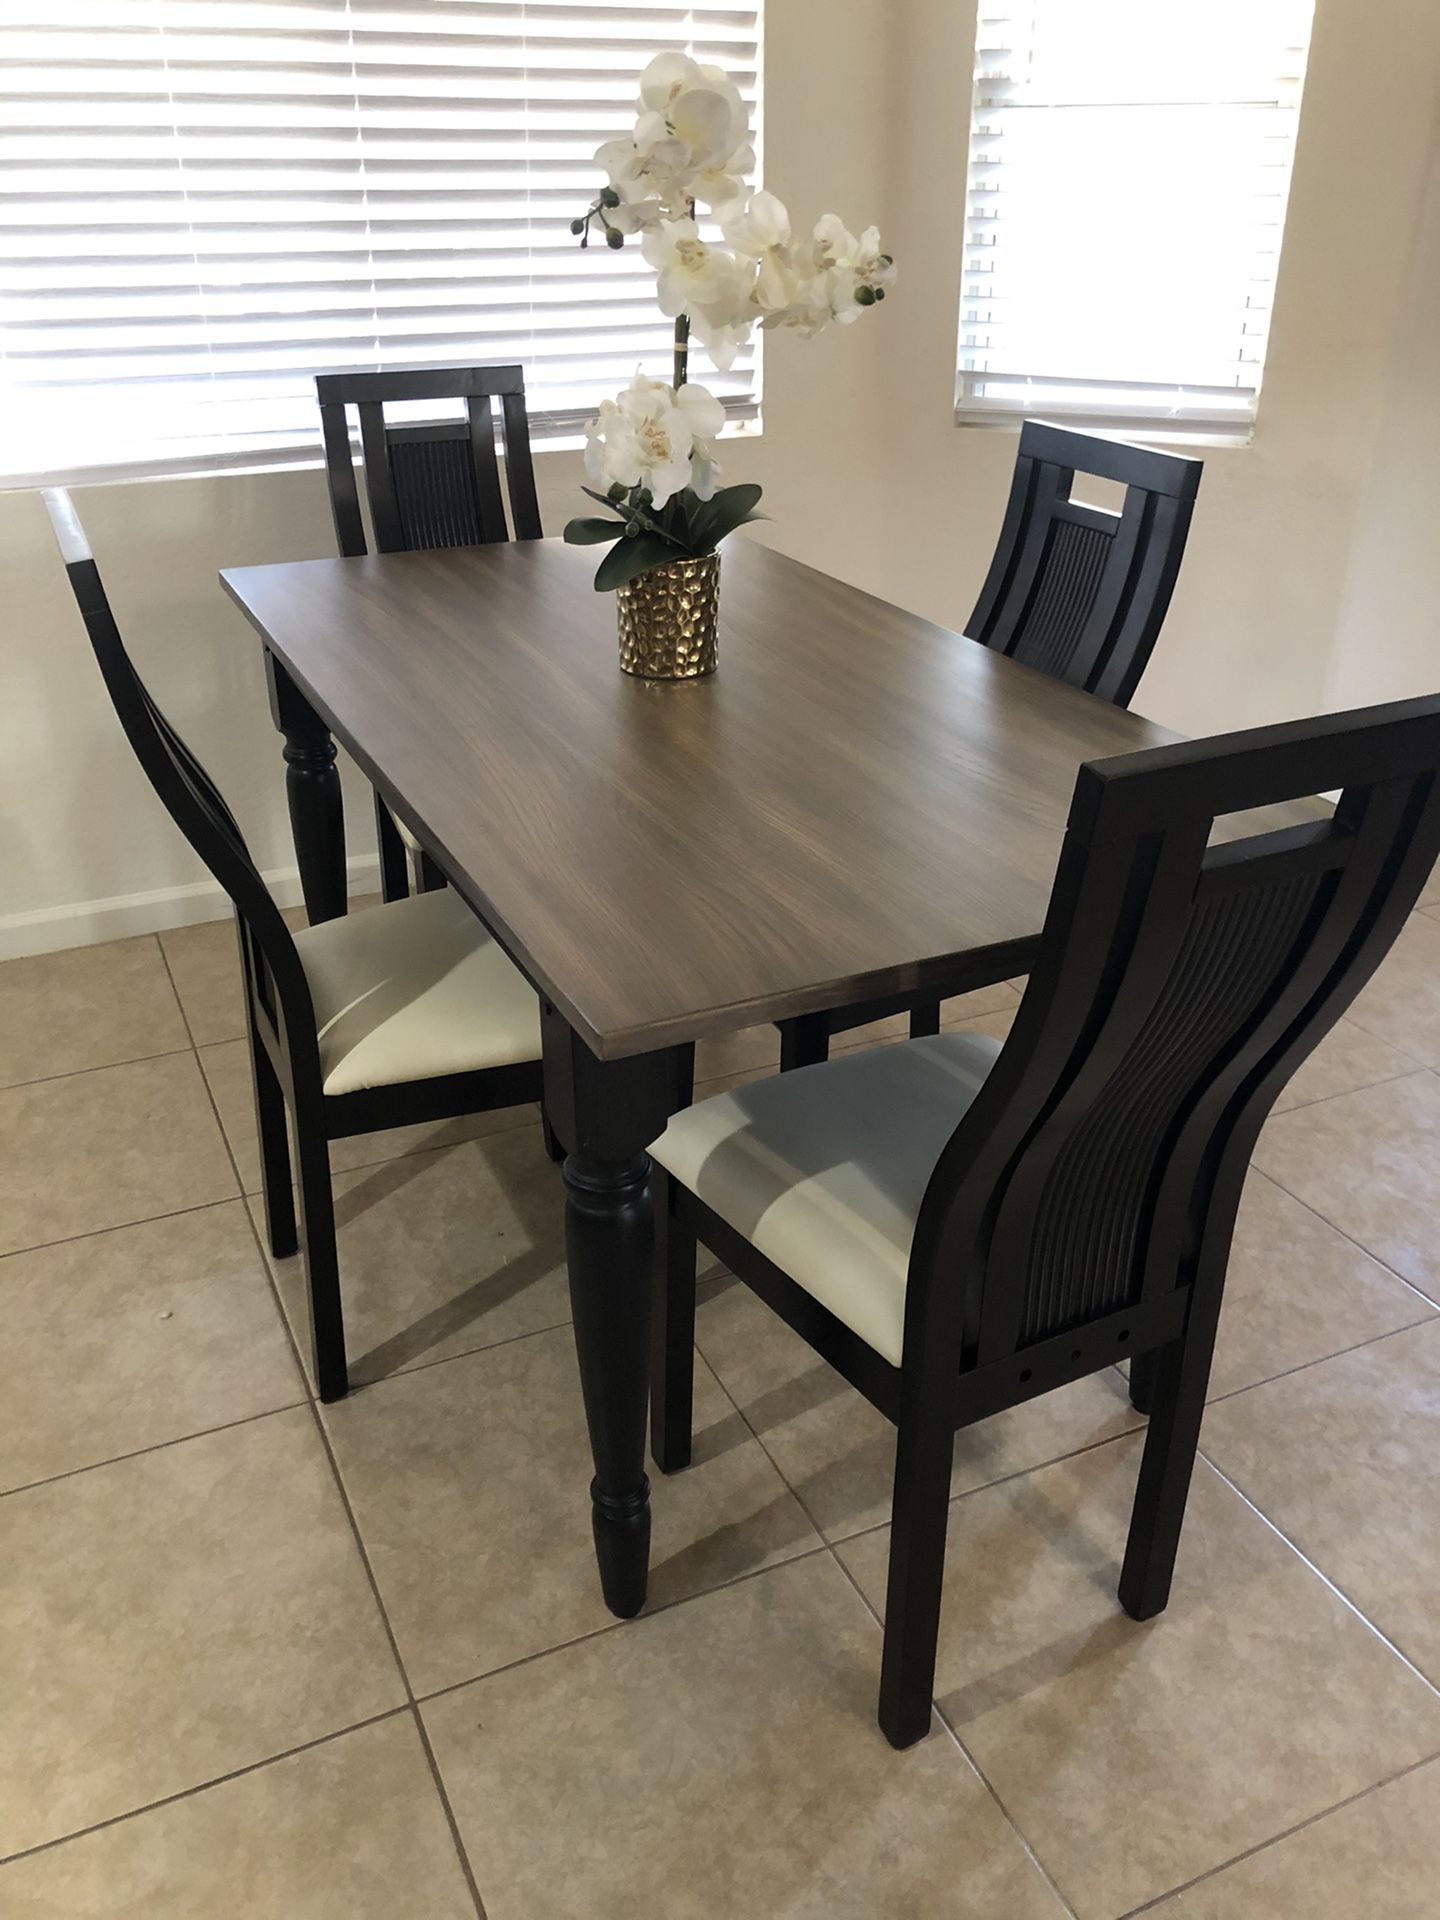 BRAND NEW DINNING TABLE AND 4 CHAIR SET FROM BEST MASTER $190 new in box